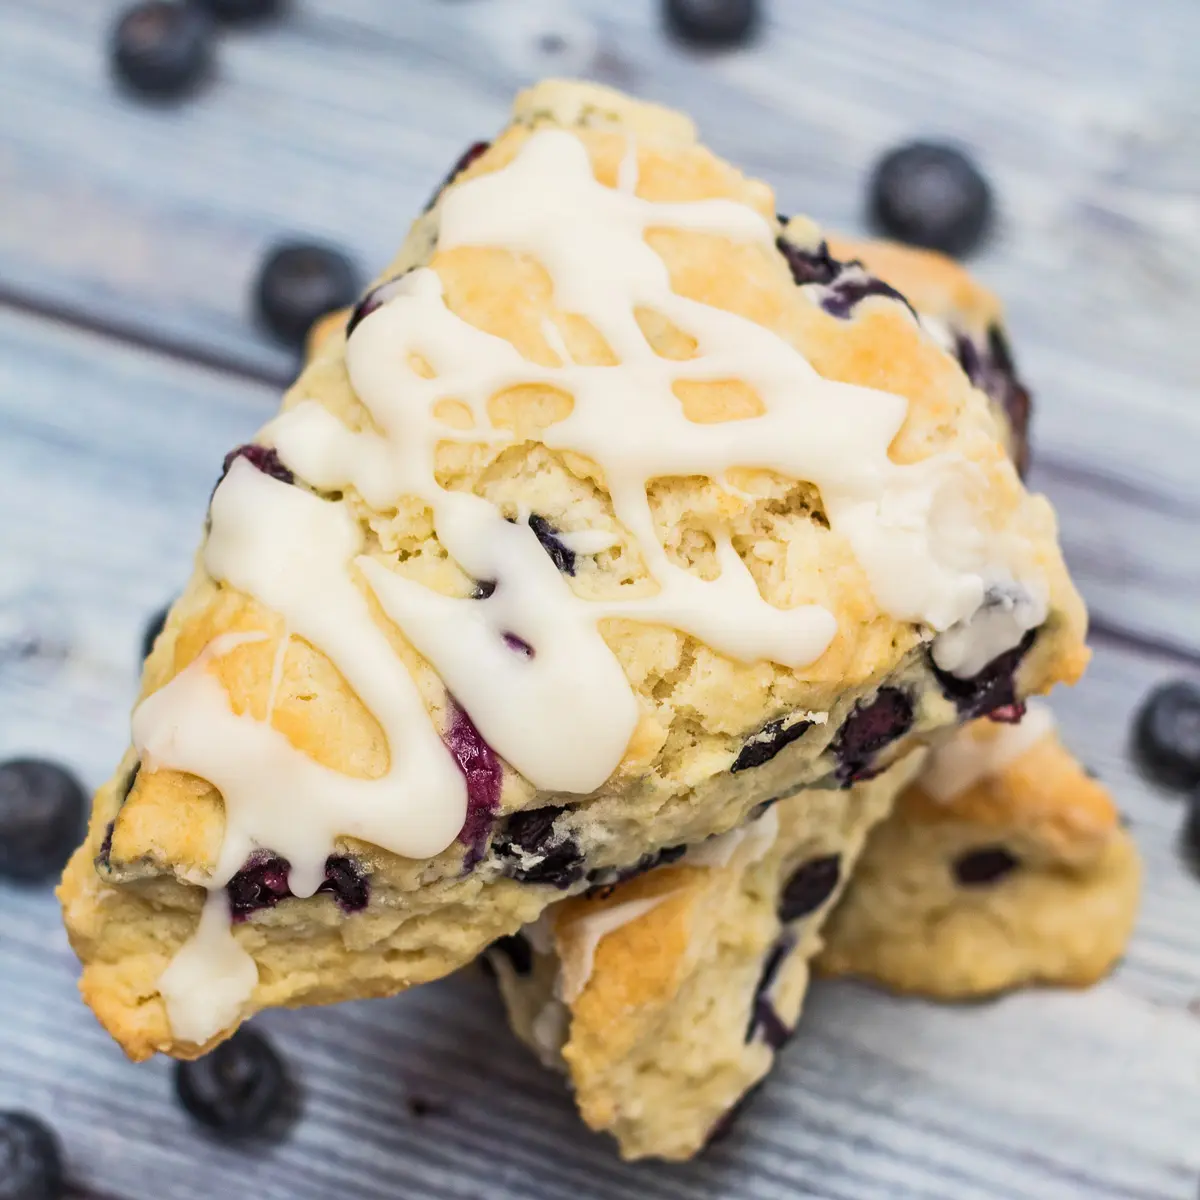 Blueberry cream cheese scones with icing and blueberries in background.